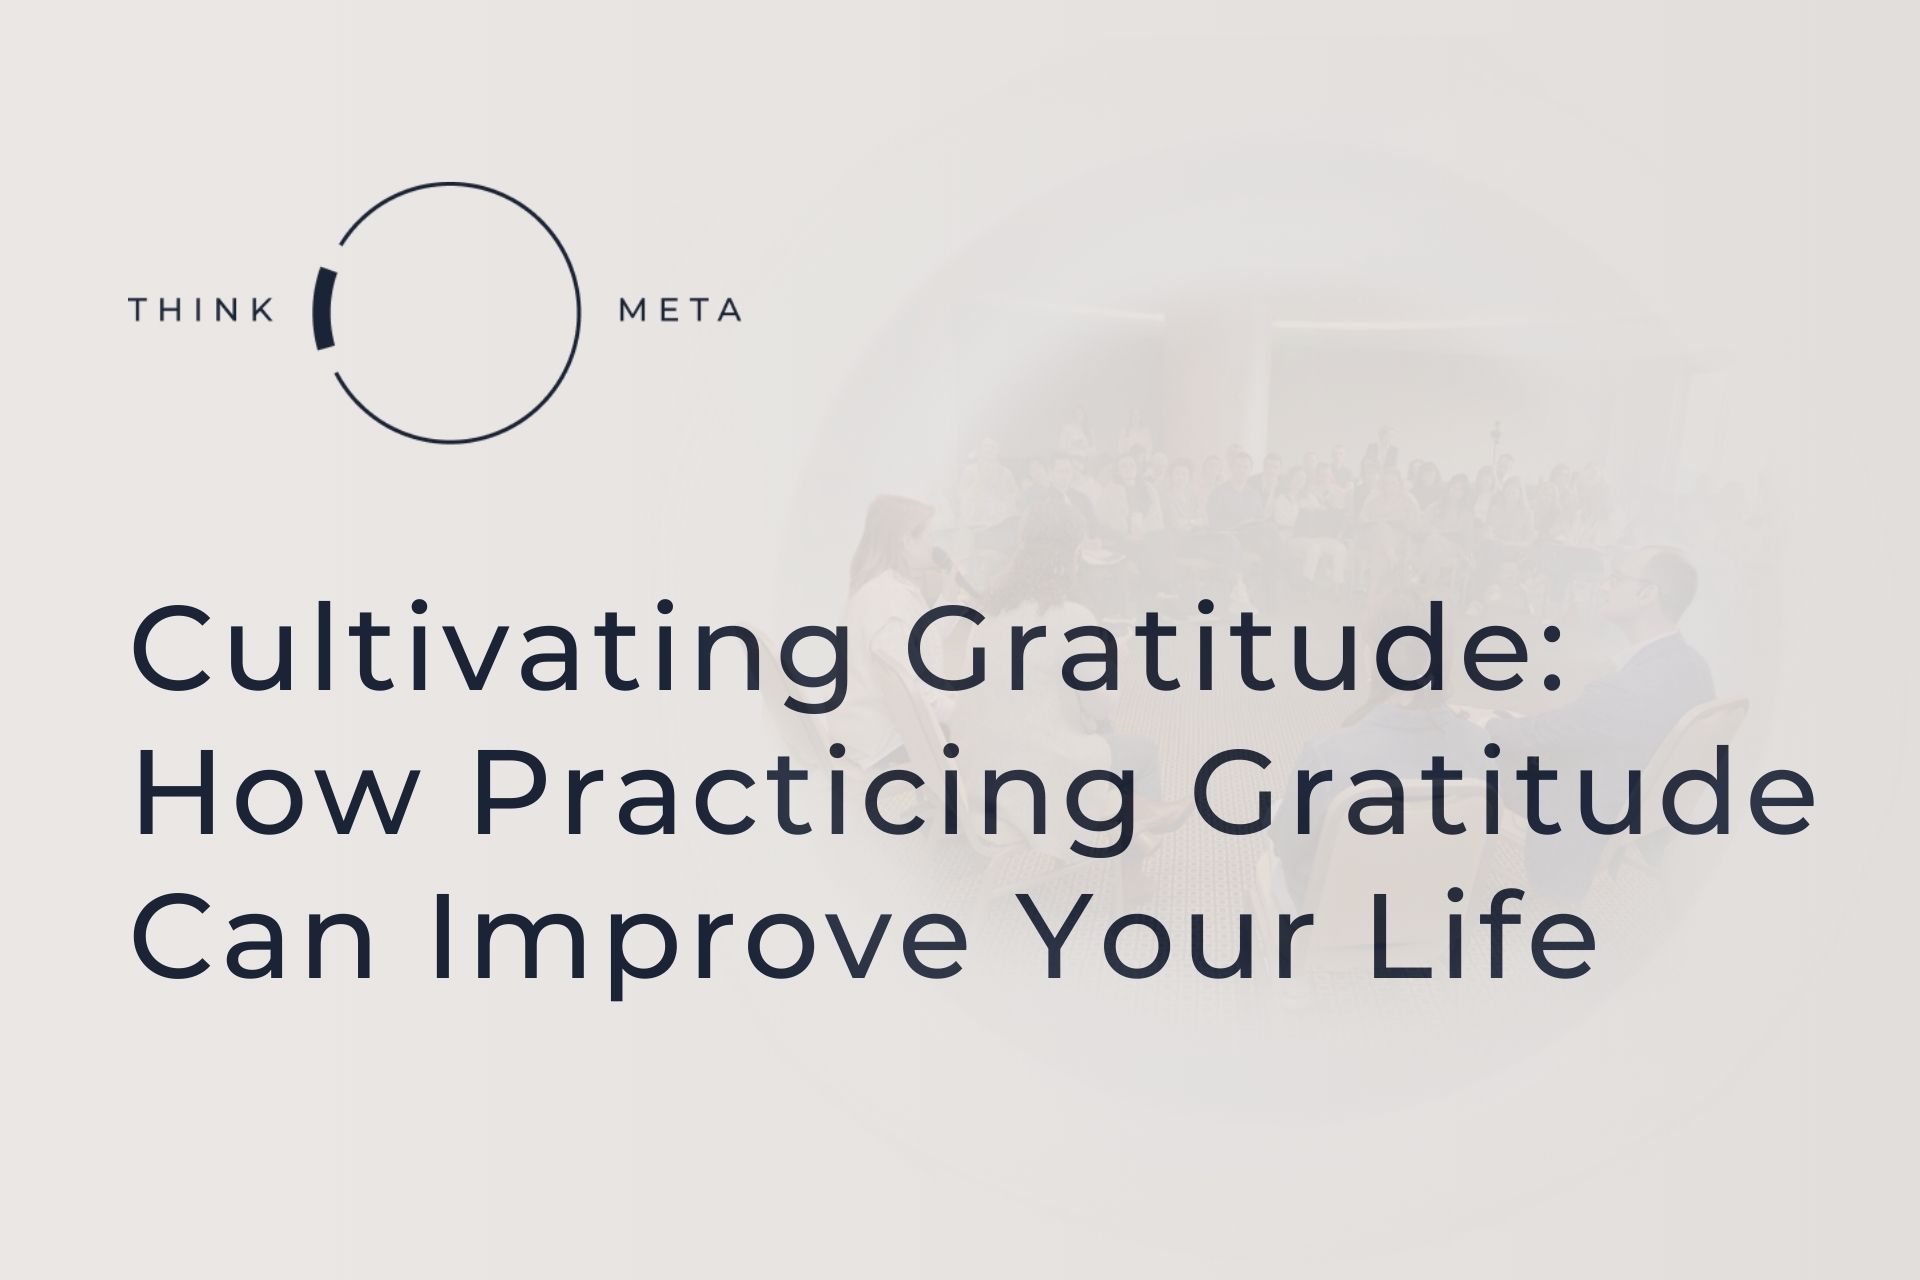 Cultivating Gratitude: How Practicing Gratitude Can Improve Your Life